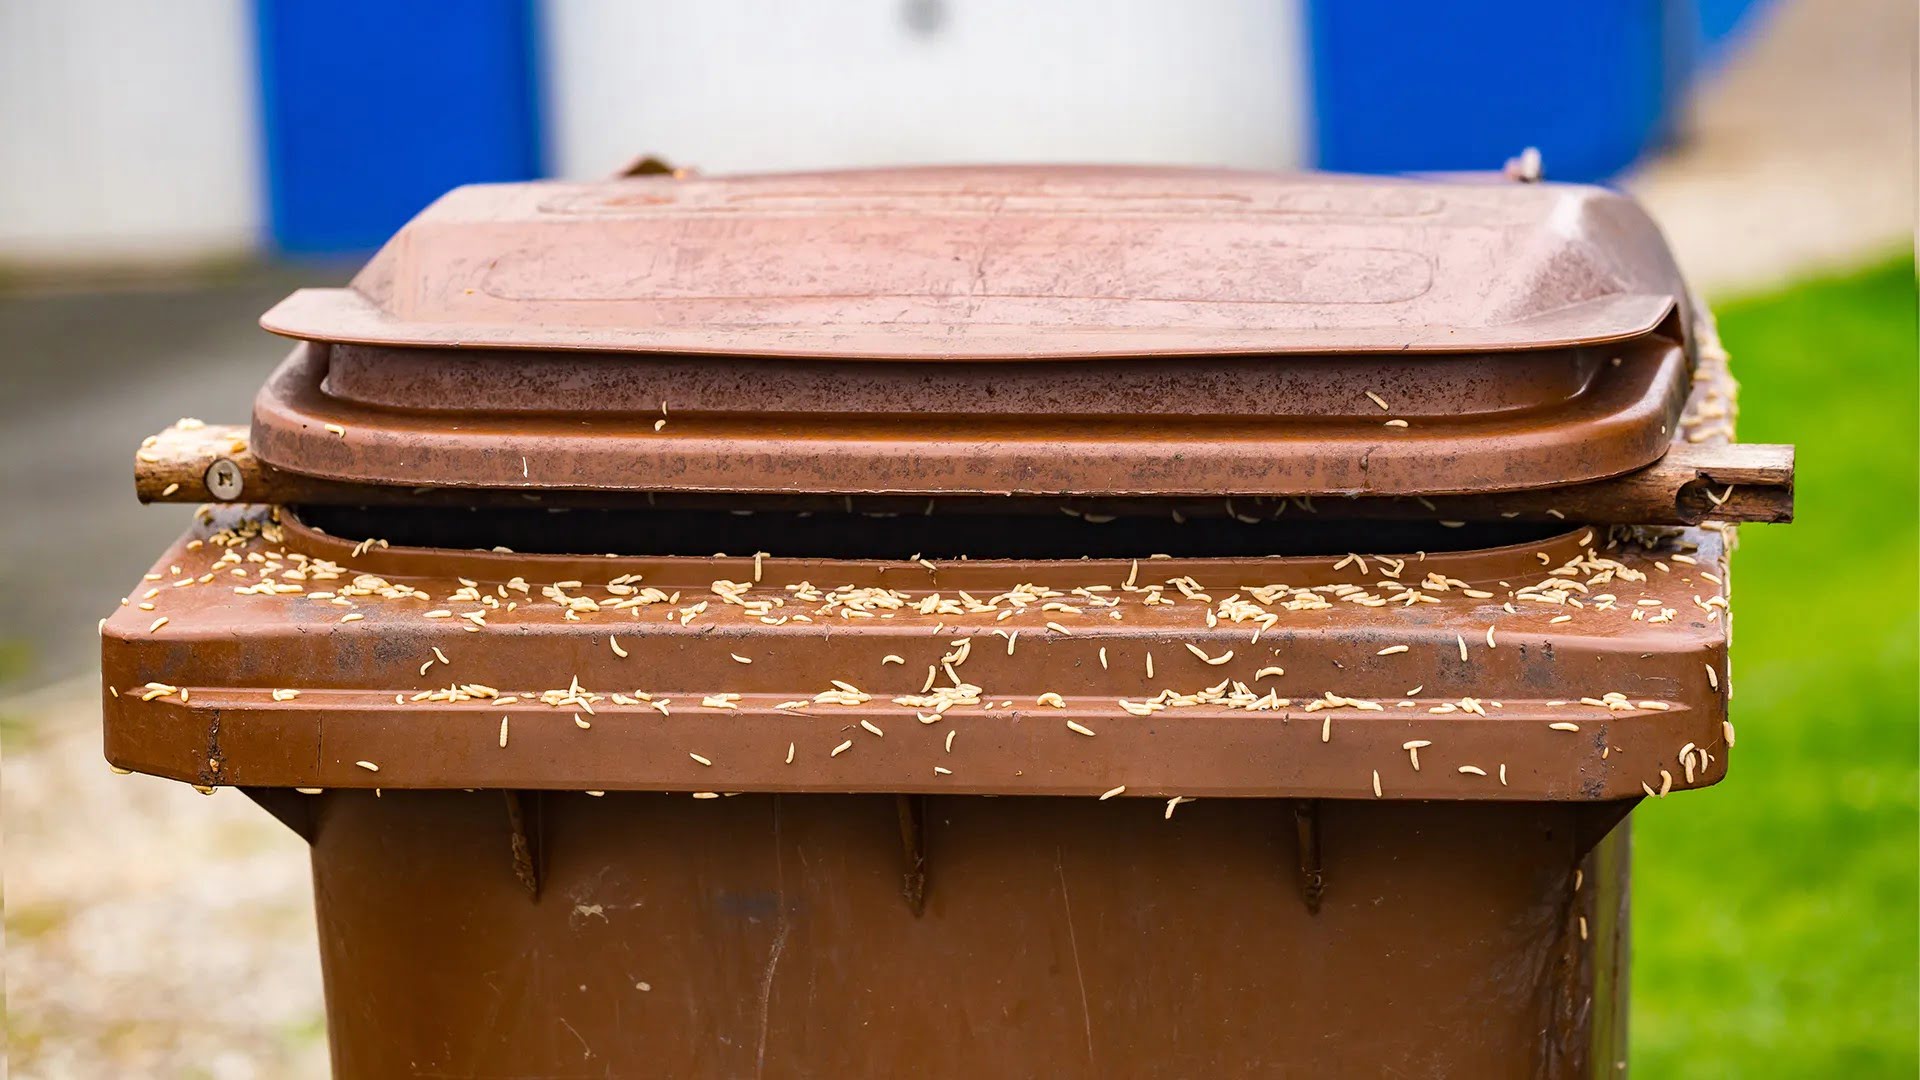 How To Prevent Maggots In An Outdoor Trash Can 1704843517 